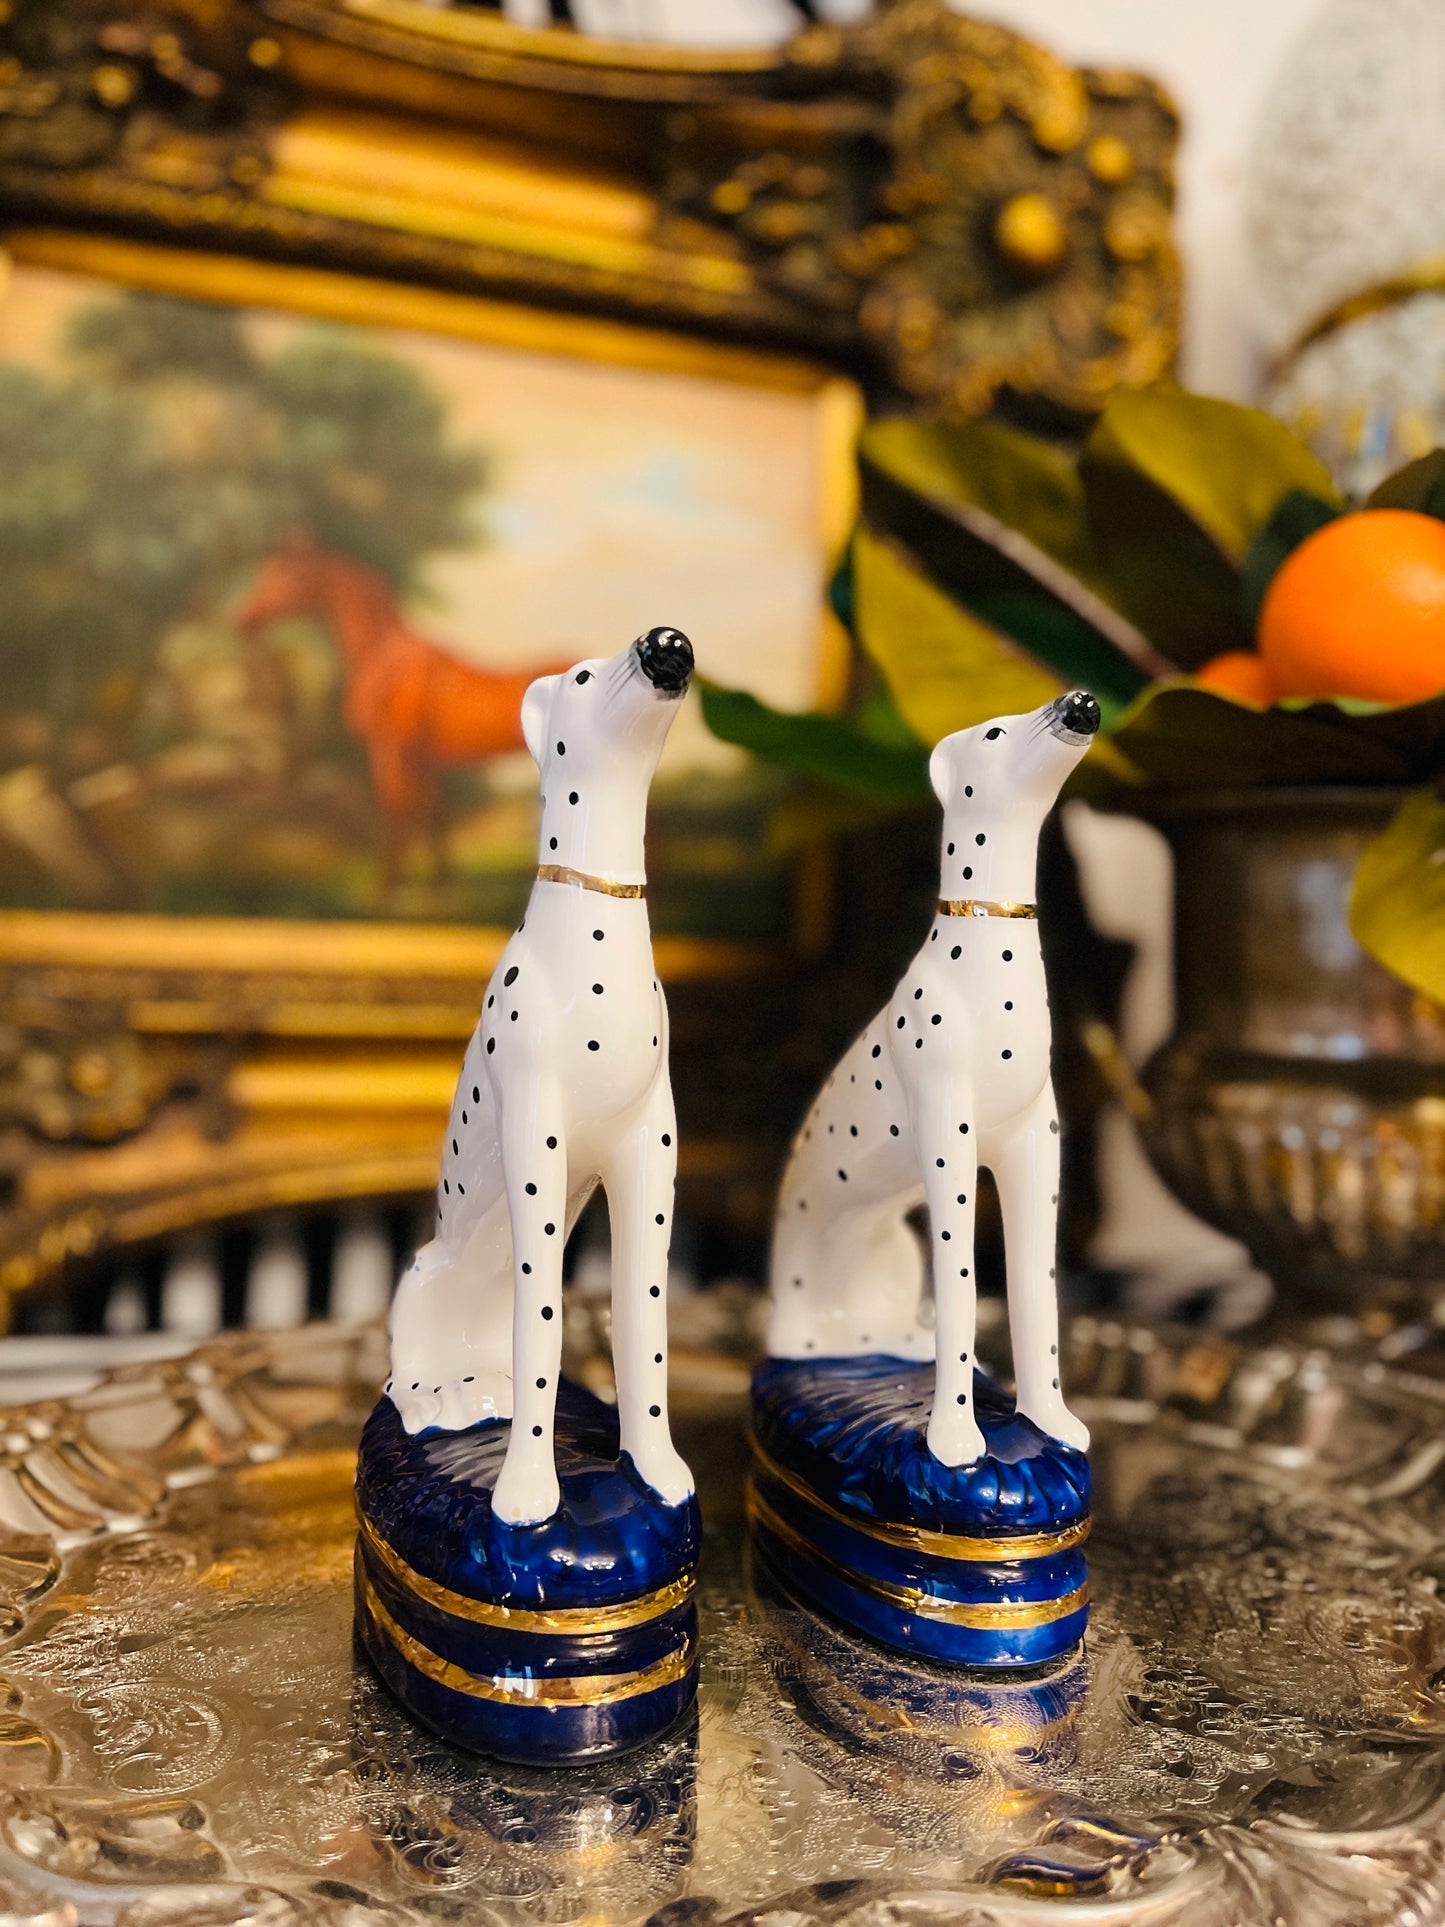 Fitz and Floyd Staffordshire Style Dalmatians, Made in Japan